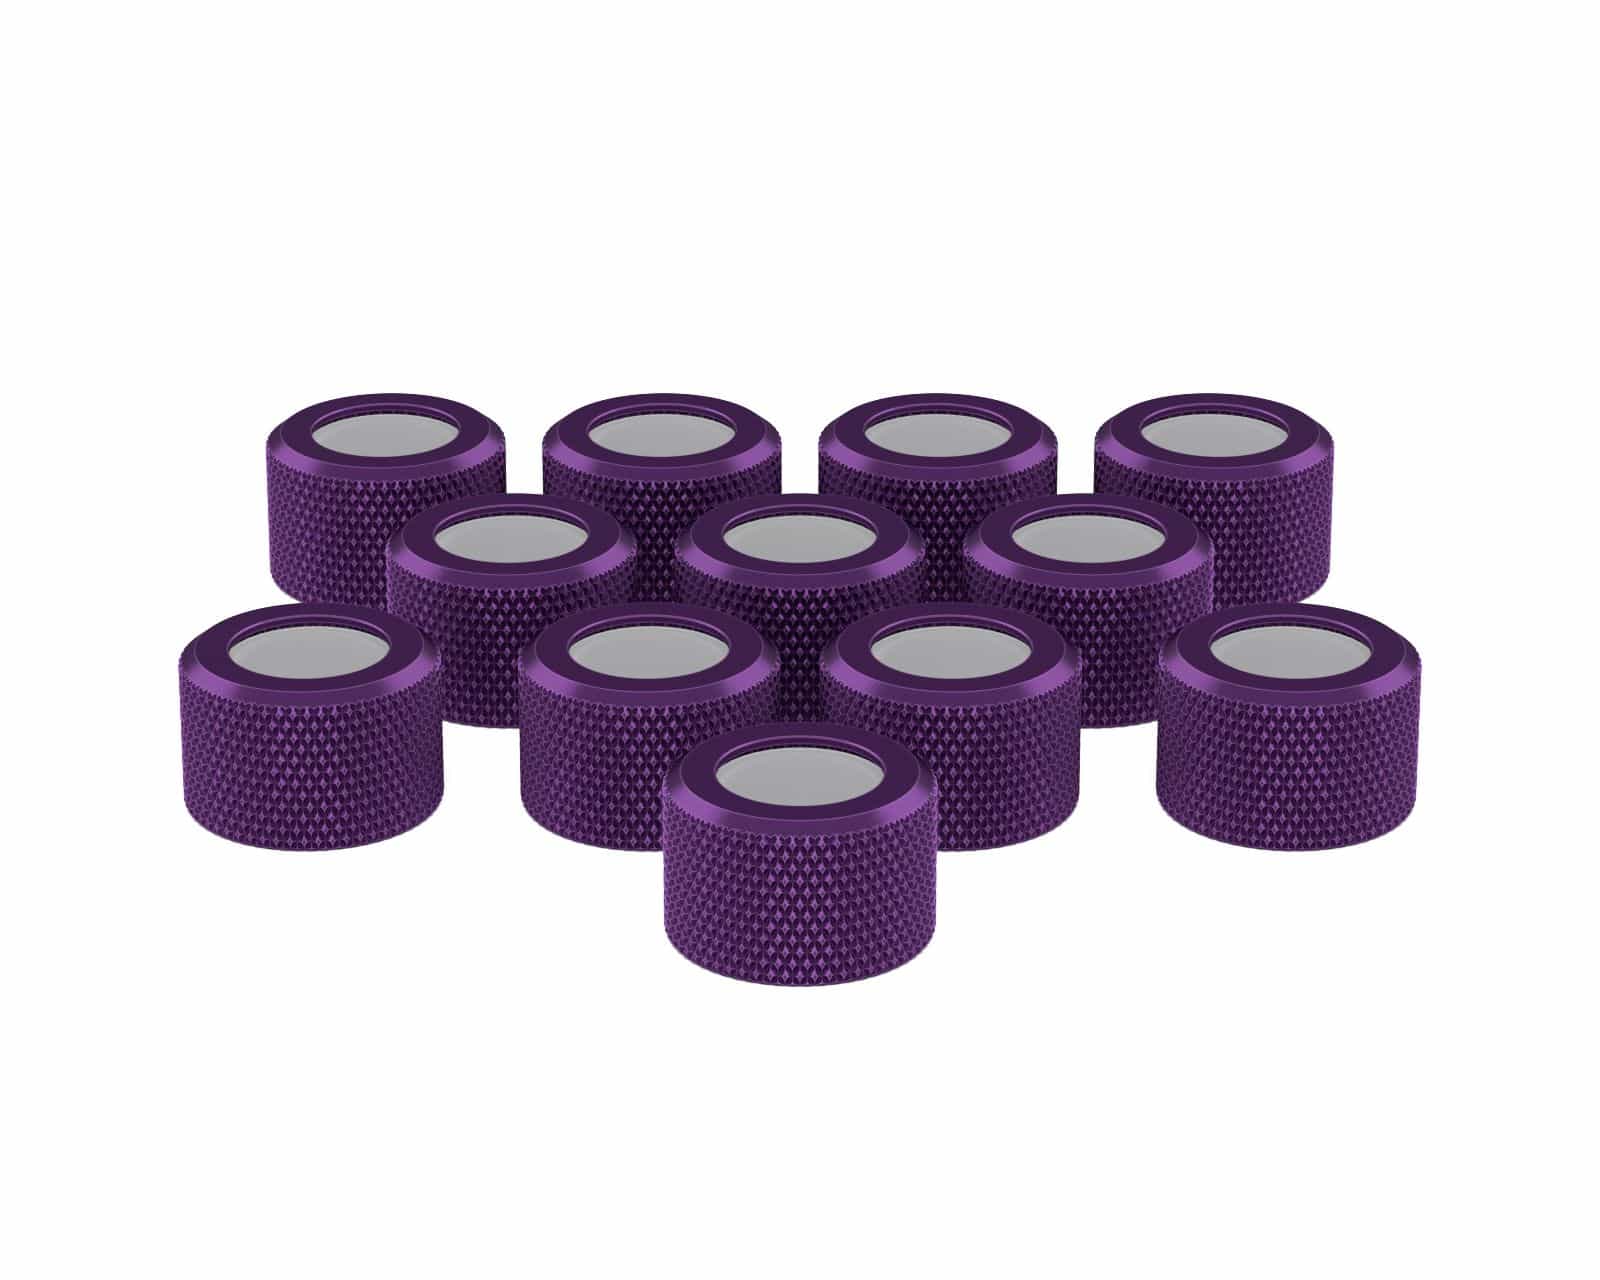 PrimoChill RMSX Replacement Cap Switch Over Kit - 14mm - PrimoChill - KEEPING IT COOL Candy Purple